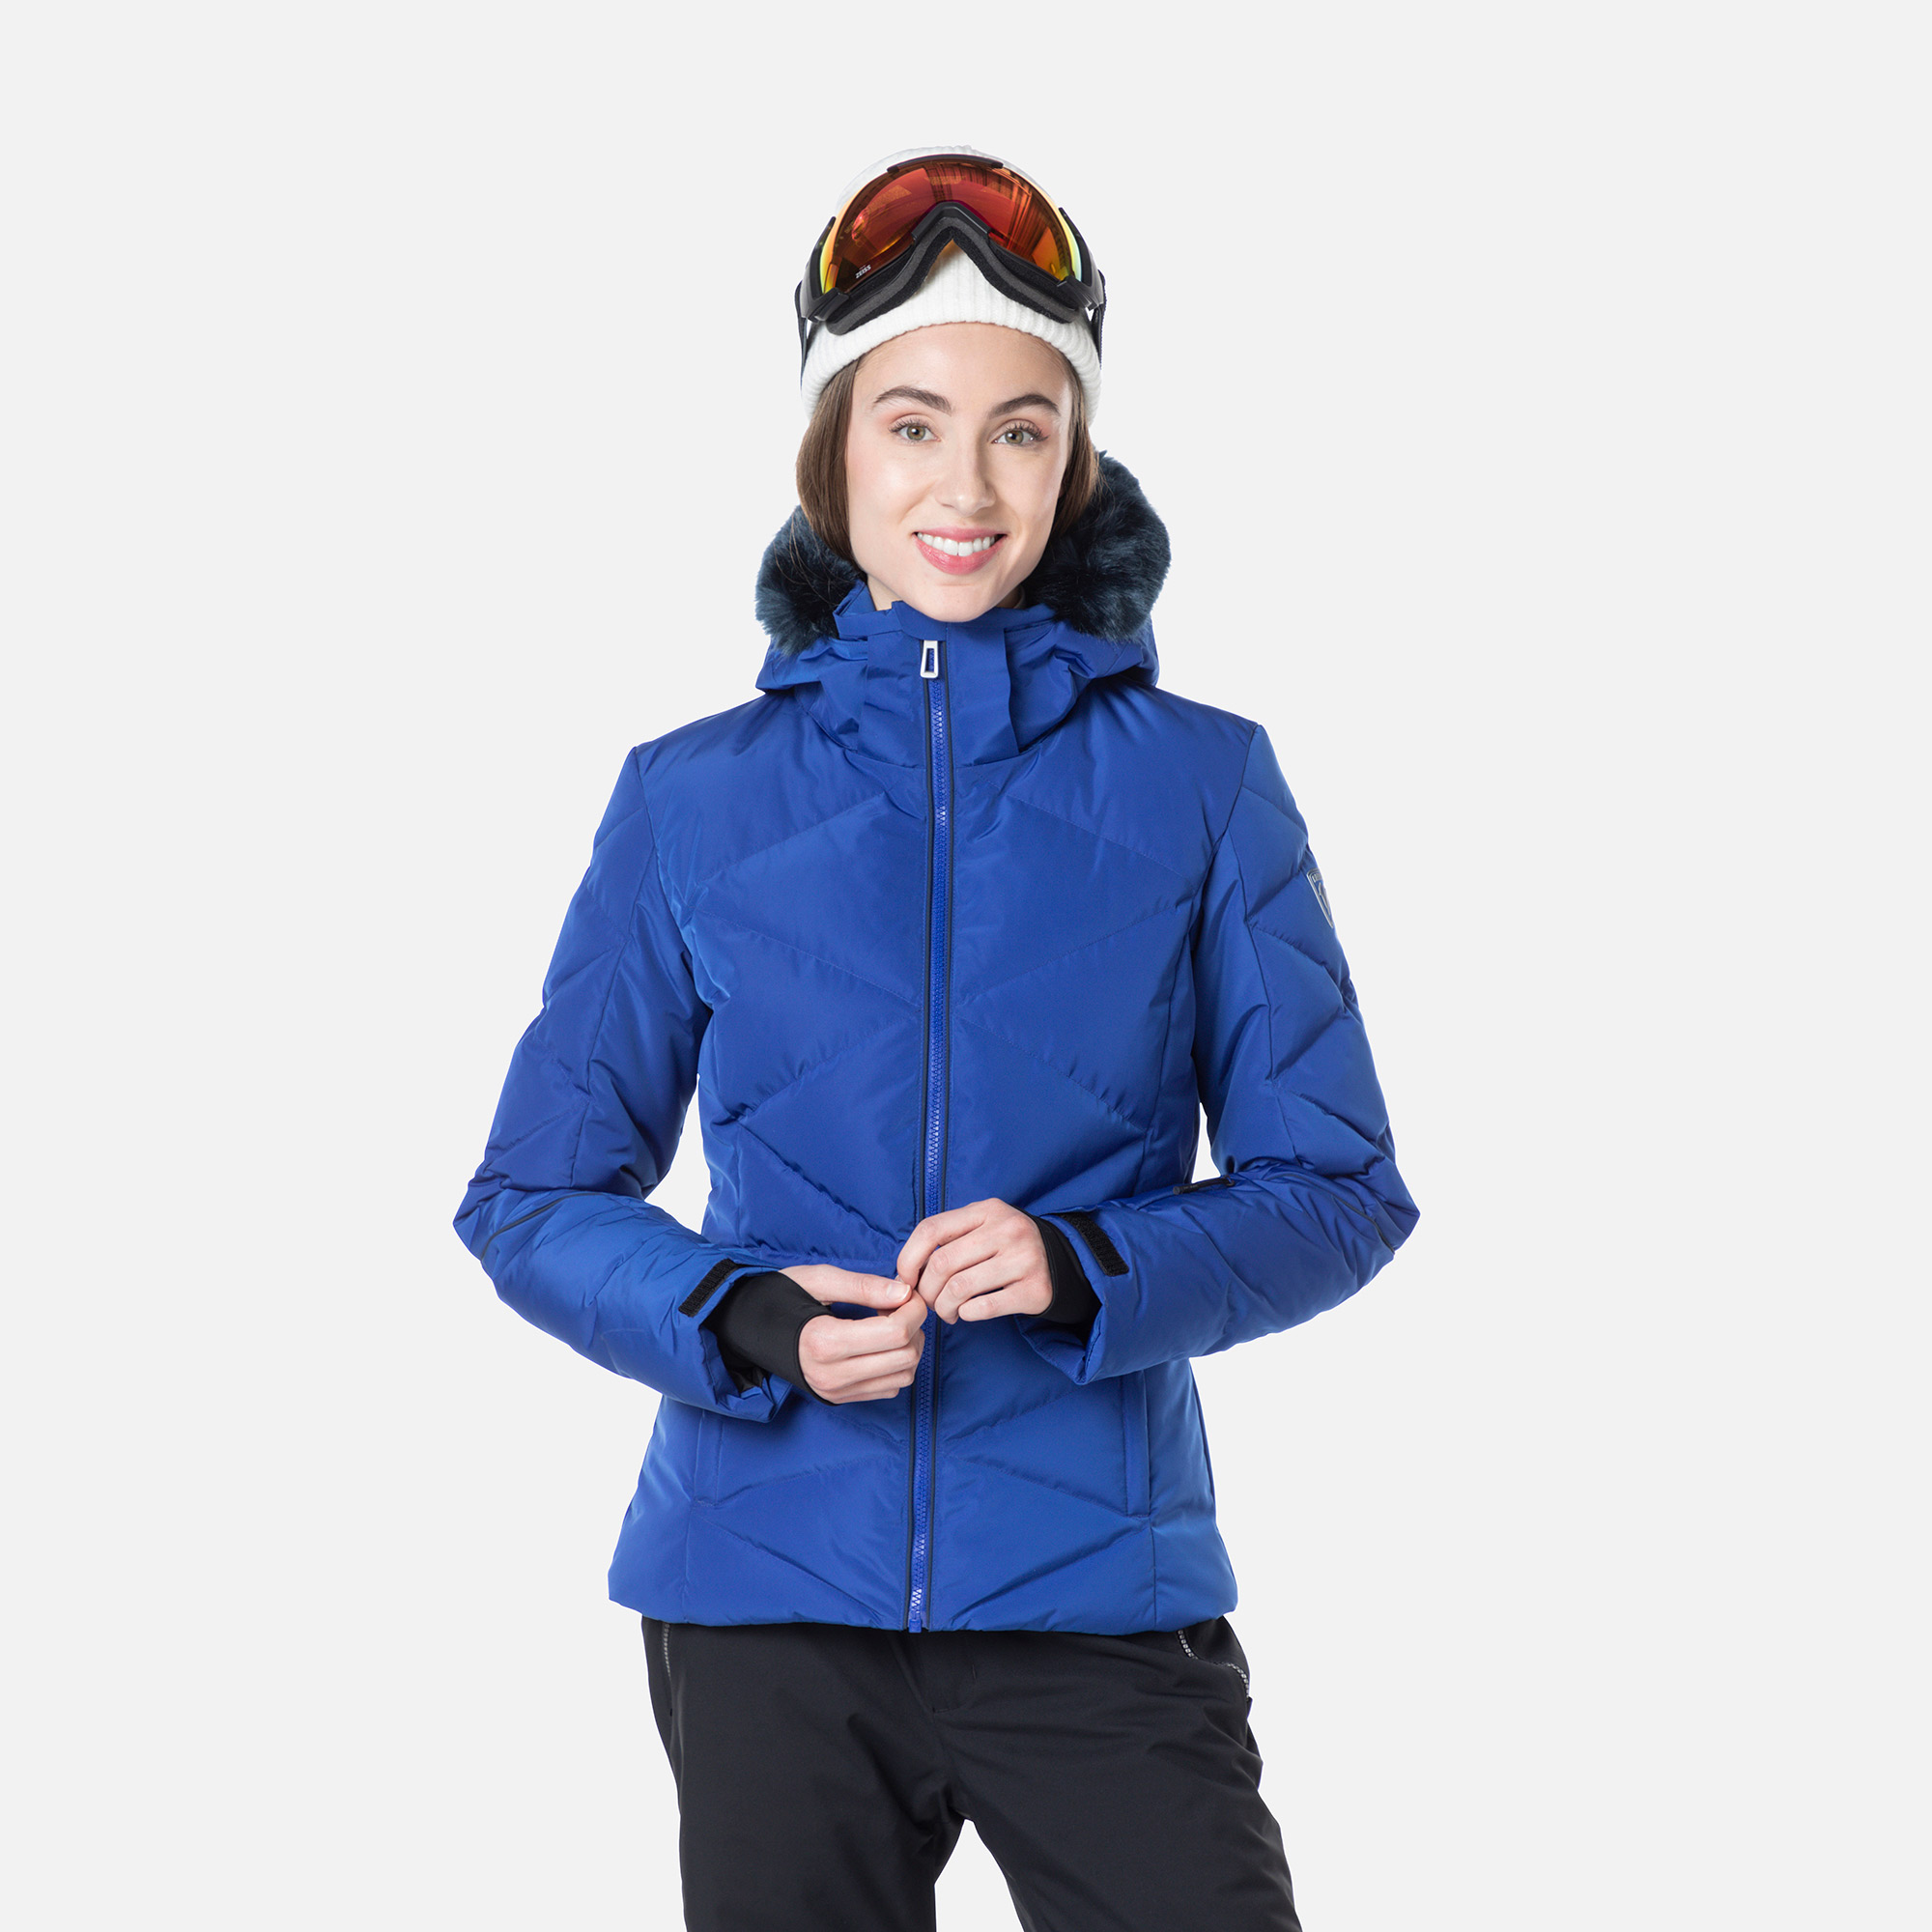 Ski jackets for men and women | Rossignol